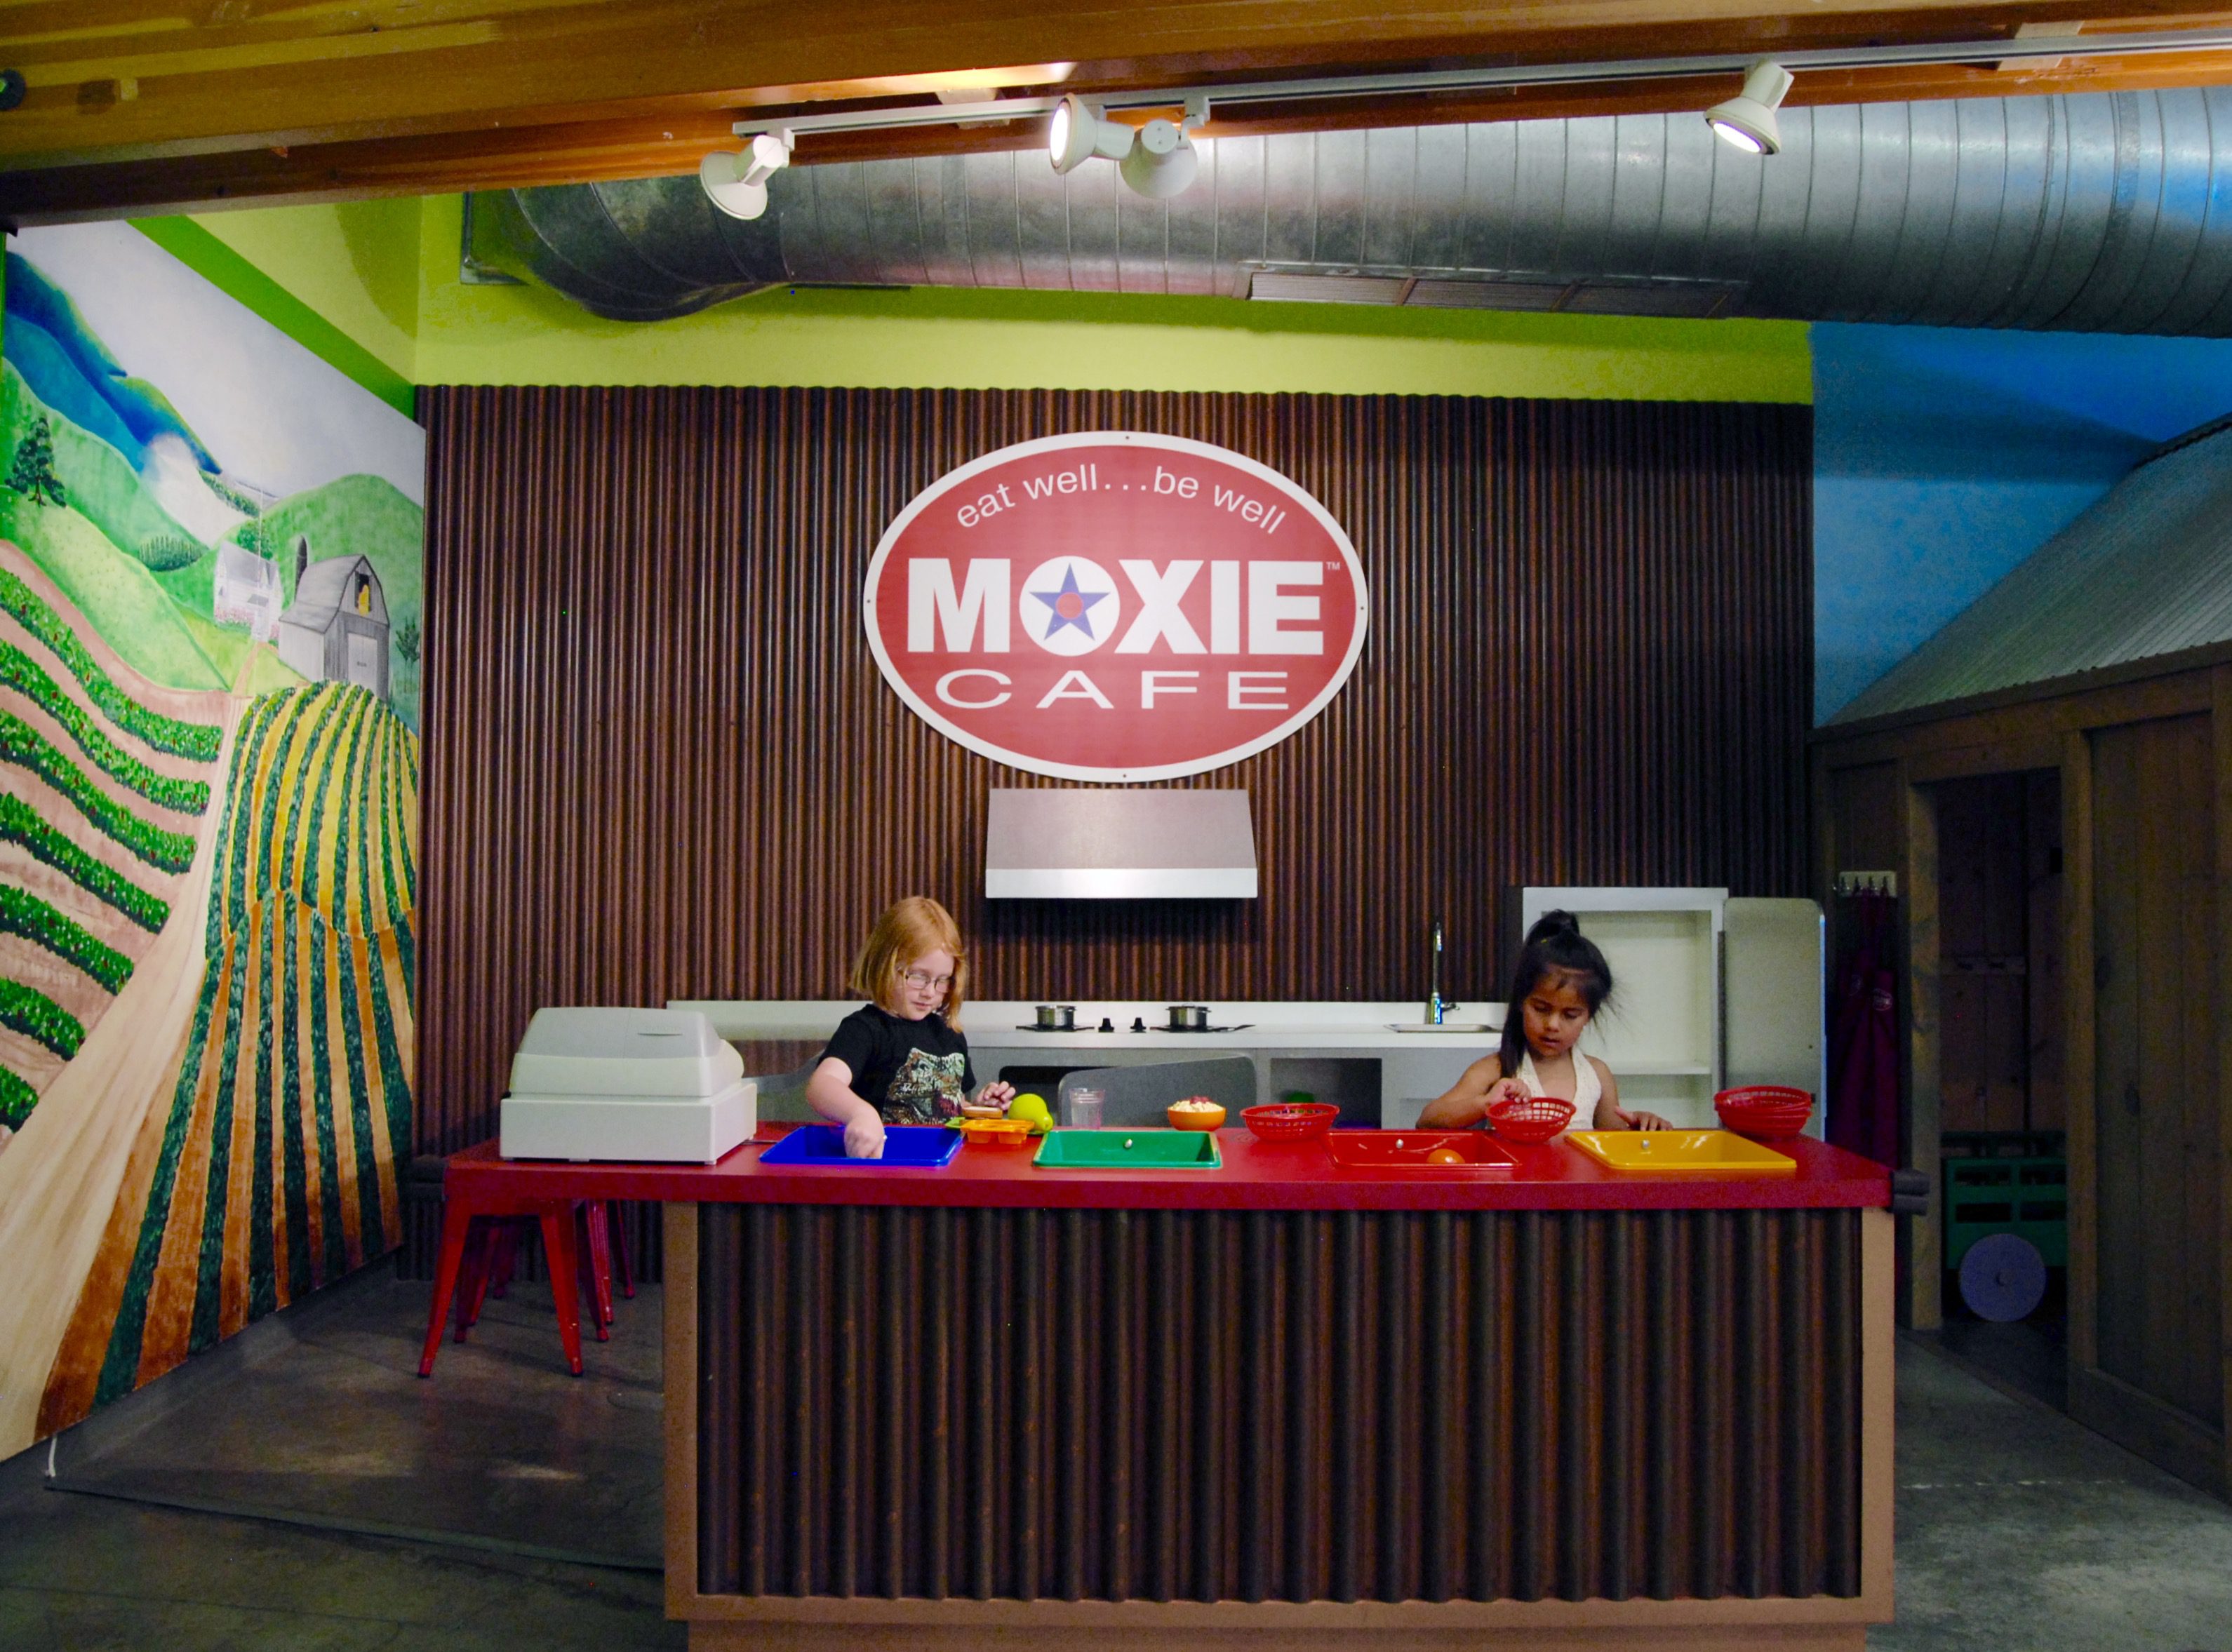 Discovery Museum Moxie Cafe, nutrition expedition launch event promotes healthy lifestyles